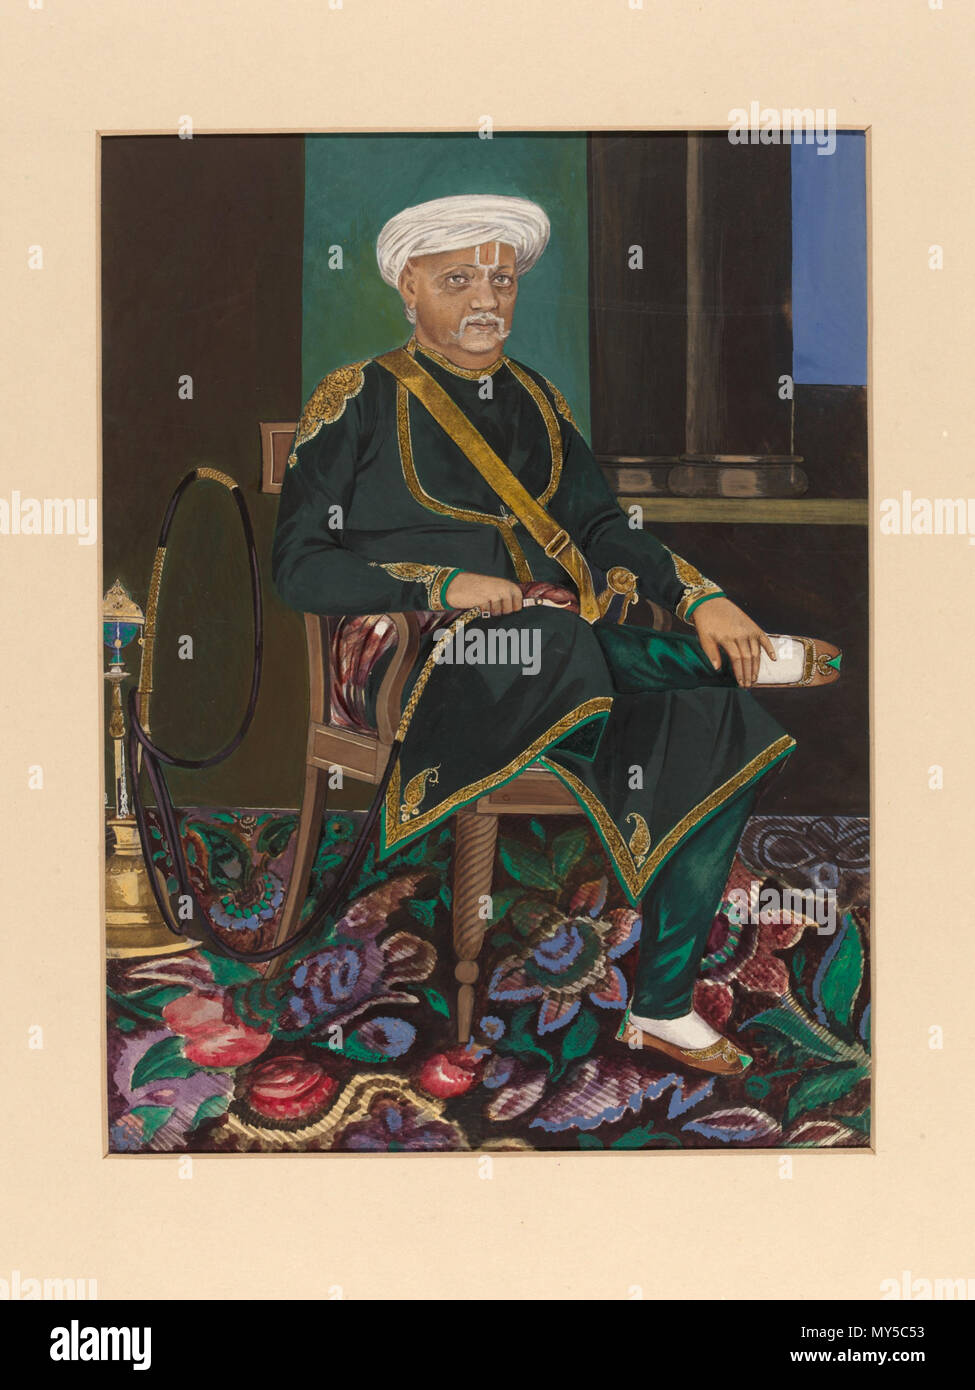 . English: This Company Painting is a portrait of Thakur Bhoj Raj Singh seated on a European chair holding the mouthpiece of a huqqa. It was drawn by an artist named Gopal at Agra in 1874 and bears a label on both the front and back giving the price as £4; it was acquired by the India Museum soon afterwards and transferred to the South Kensington Museum (now the V&A) in 1879. 'Thakur' is the title given to the son of a Rajput ruler who is deceased, but biographical details of the sitter have not been traced. 'Company paintings' were produced by Indian artists for Europeans living and working i Stock Photo